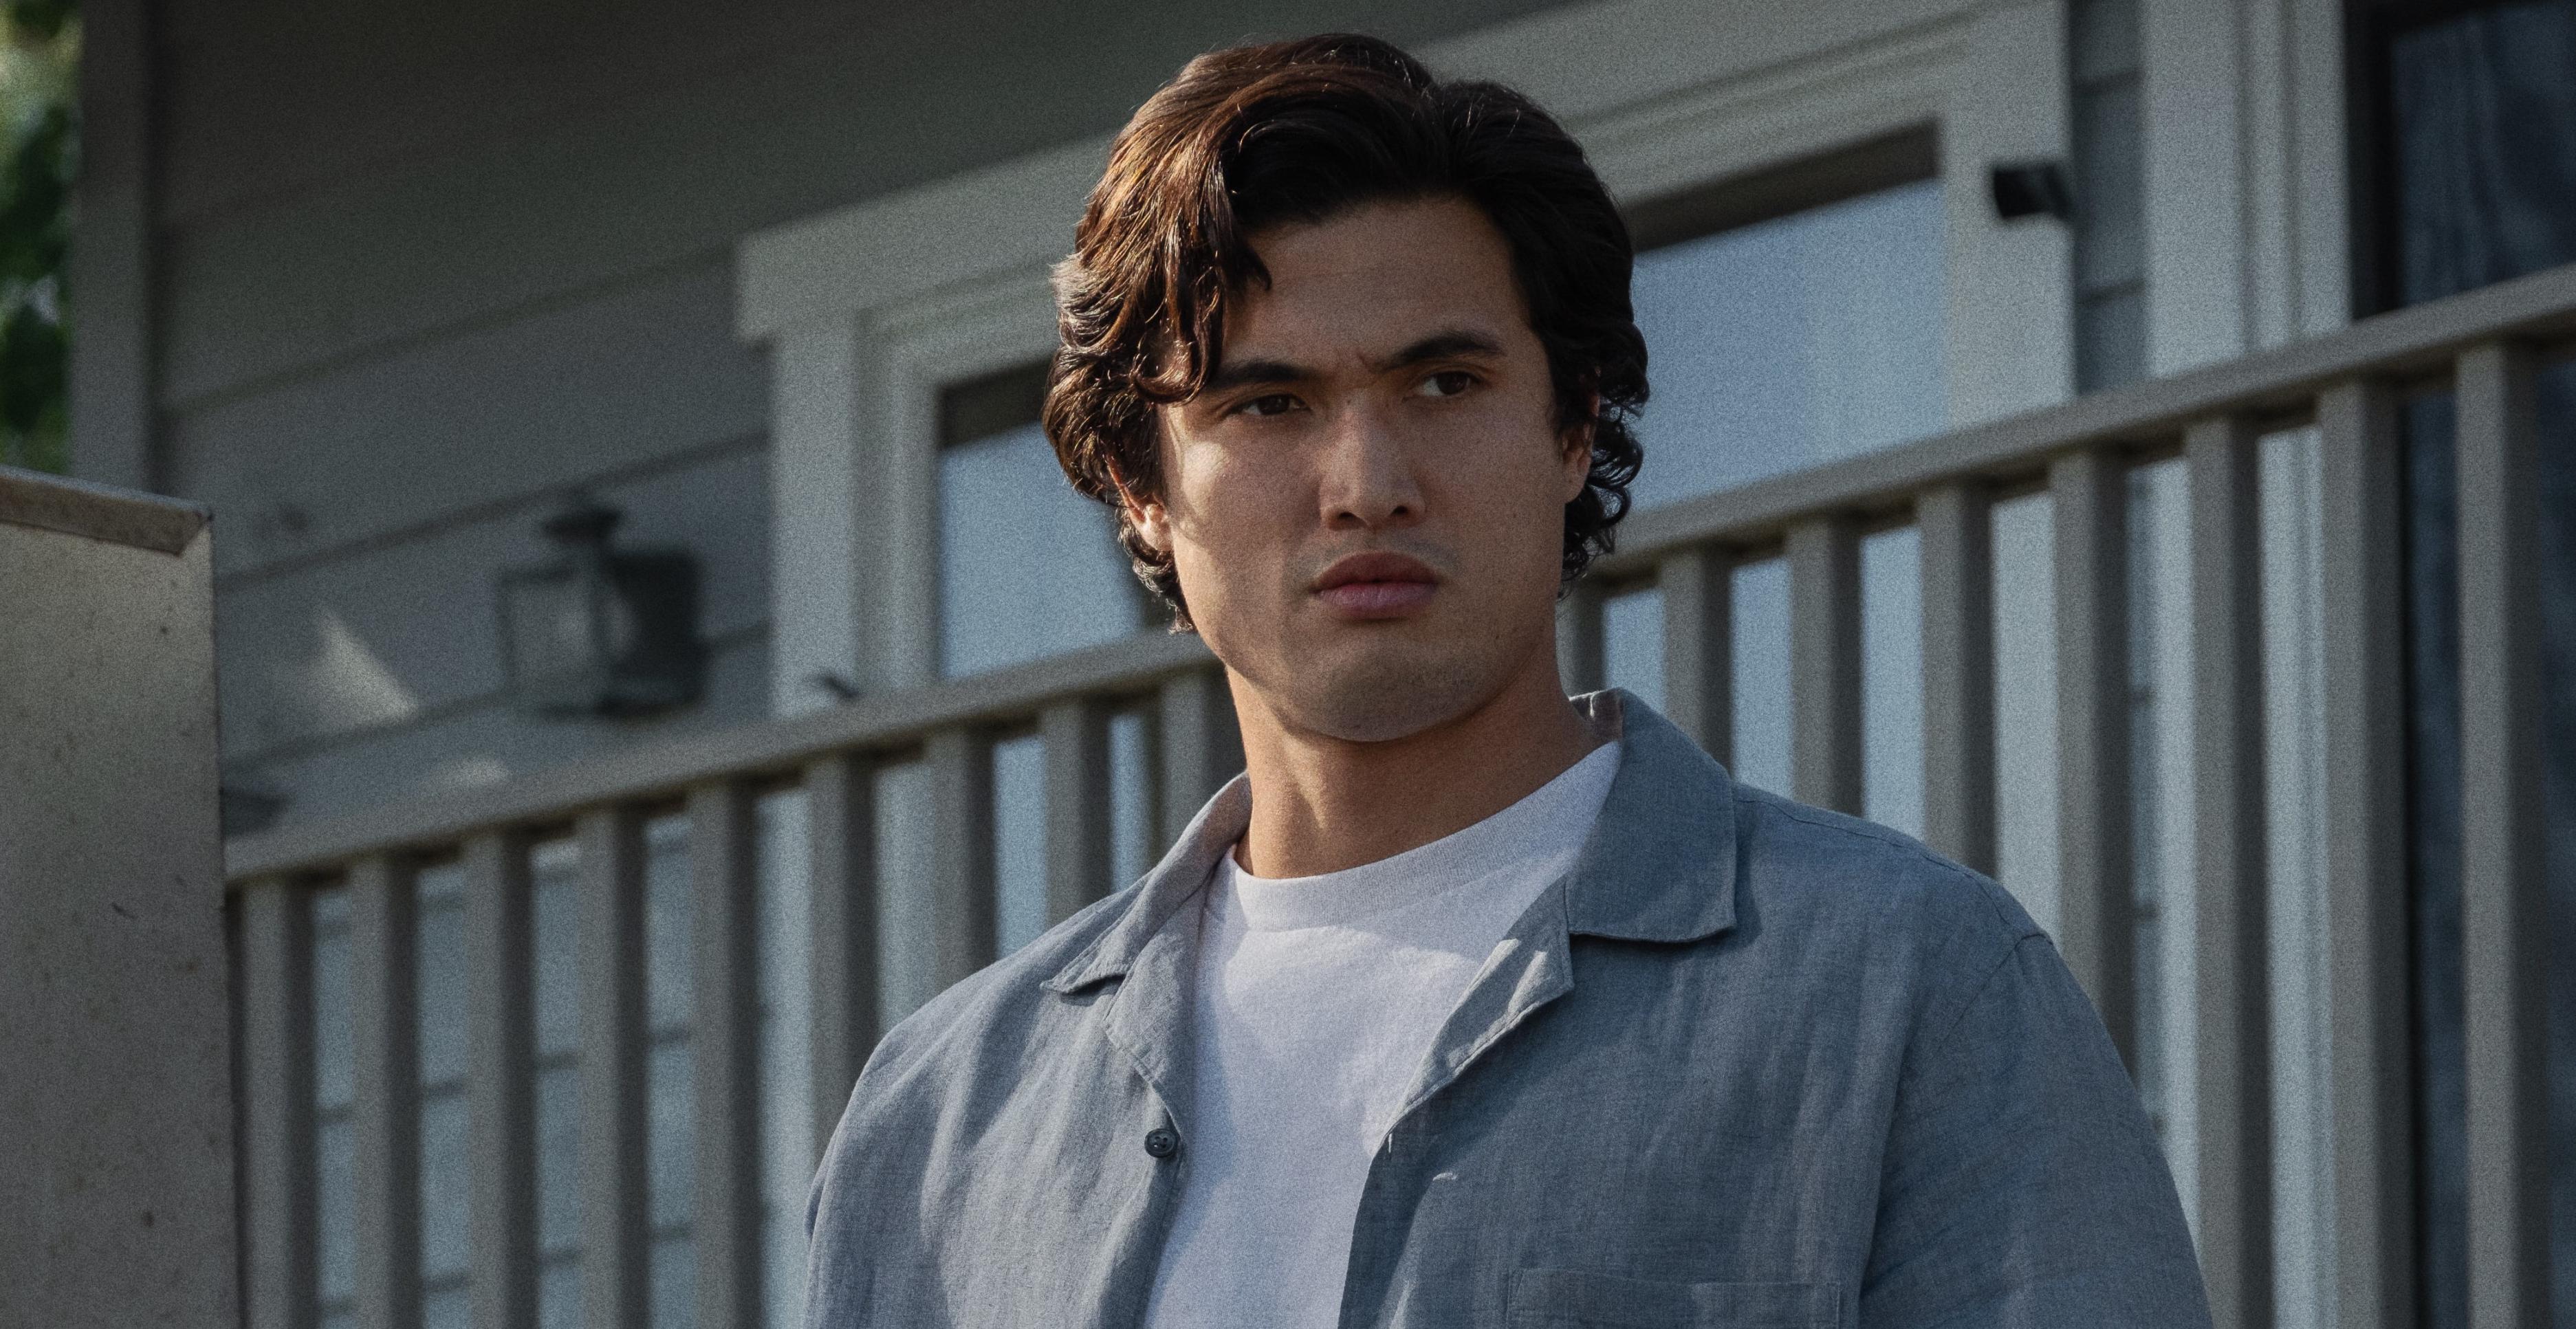 Charles Melton’s ‘Warfare’ to Begin Filming Next Month in London